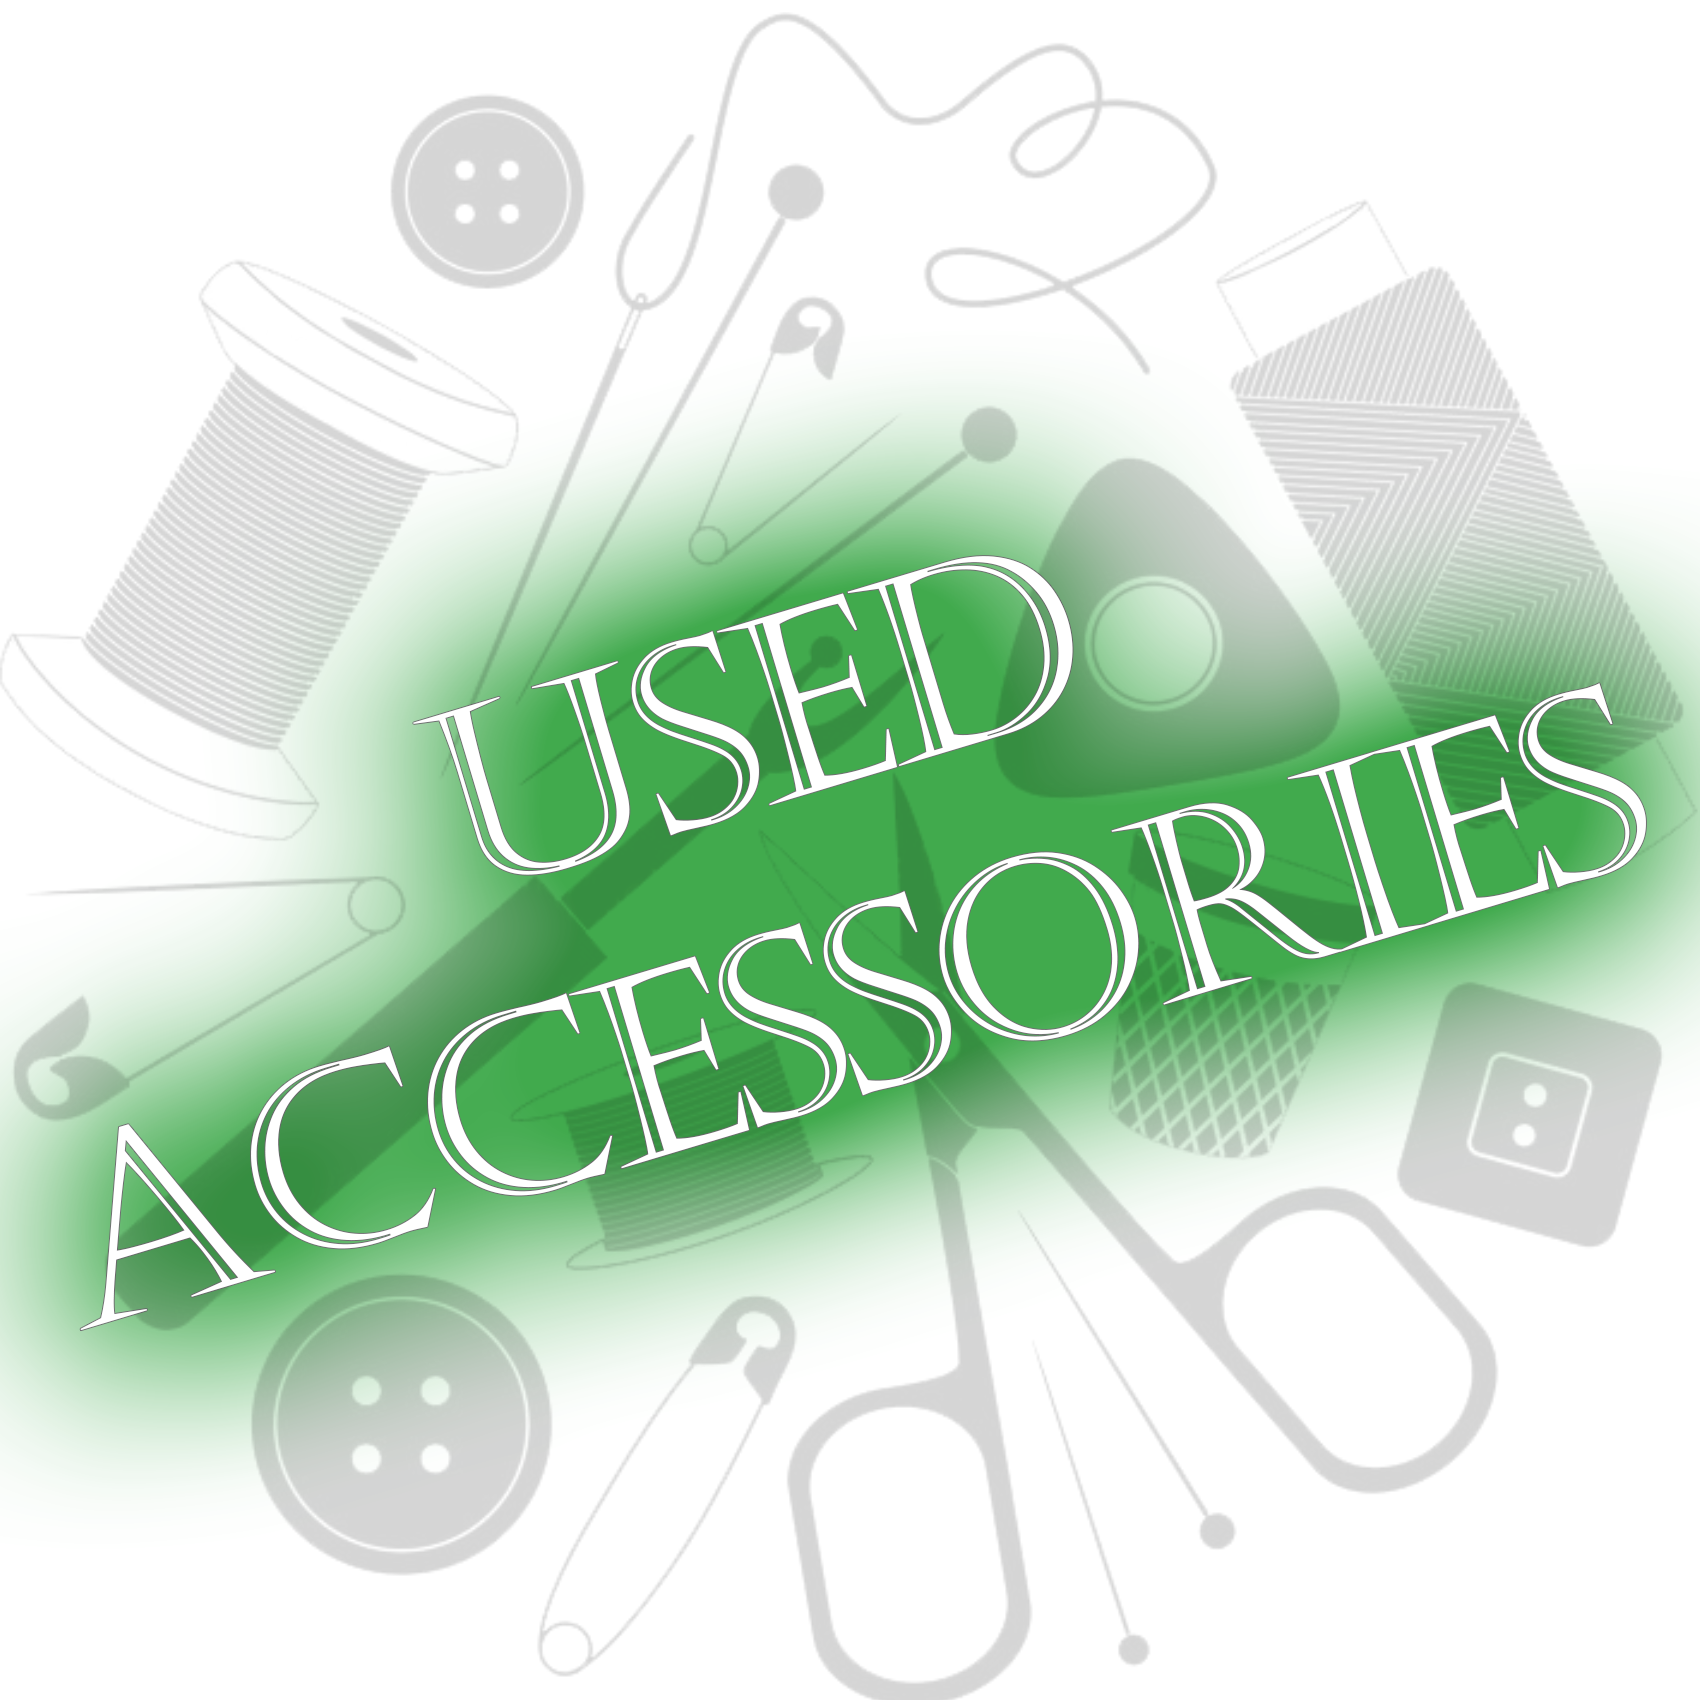 Used Sewing Machine Accessories